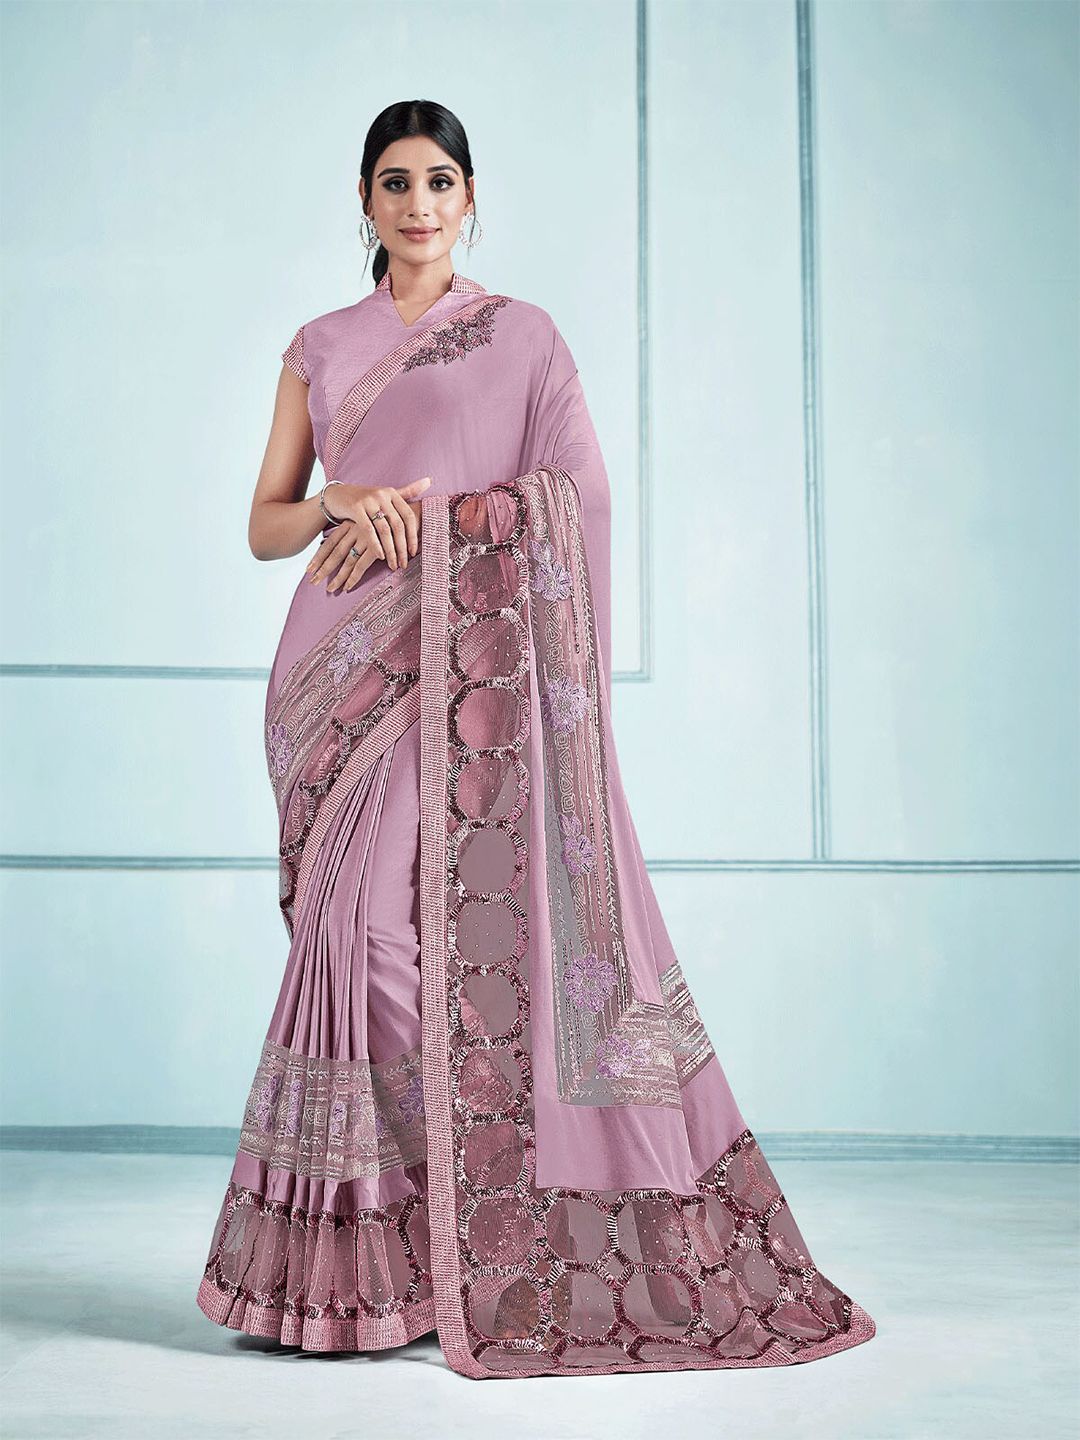 ODETTE Pink Floral Embroidered Saree Price in India